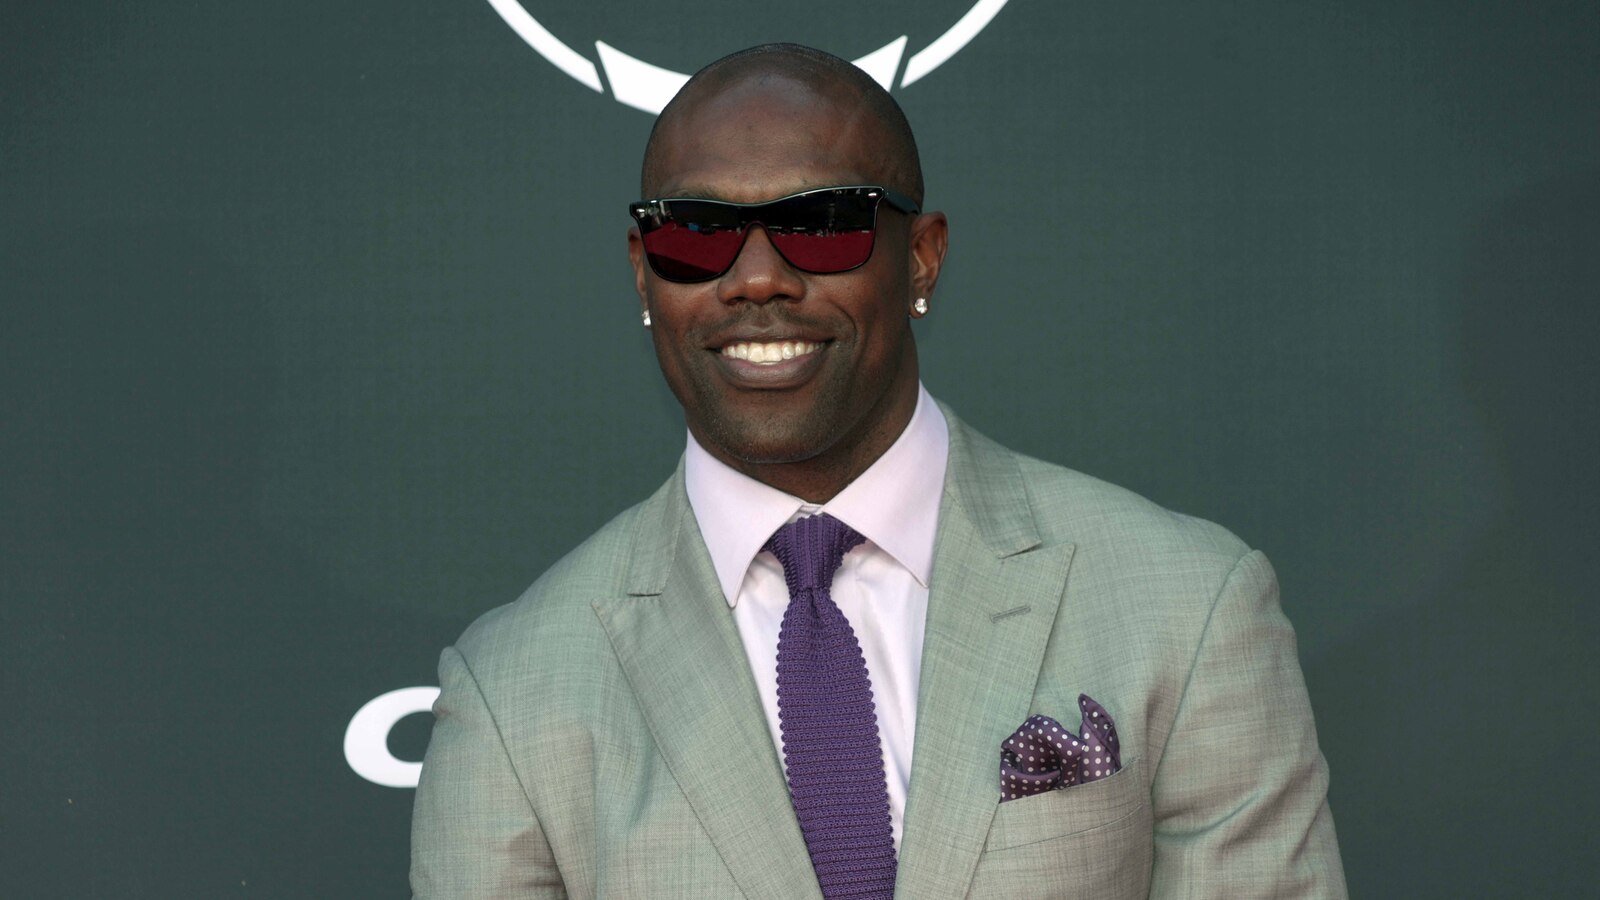 Hall of Fame WR Terrell Owens makes stunning admission about career